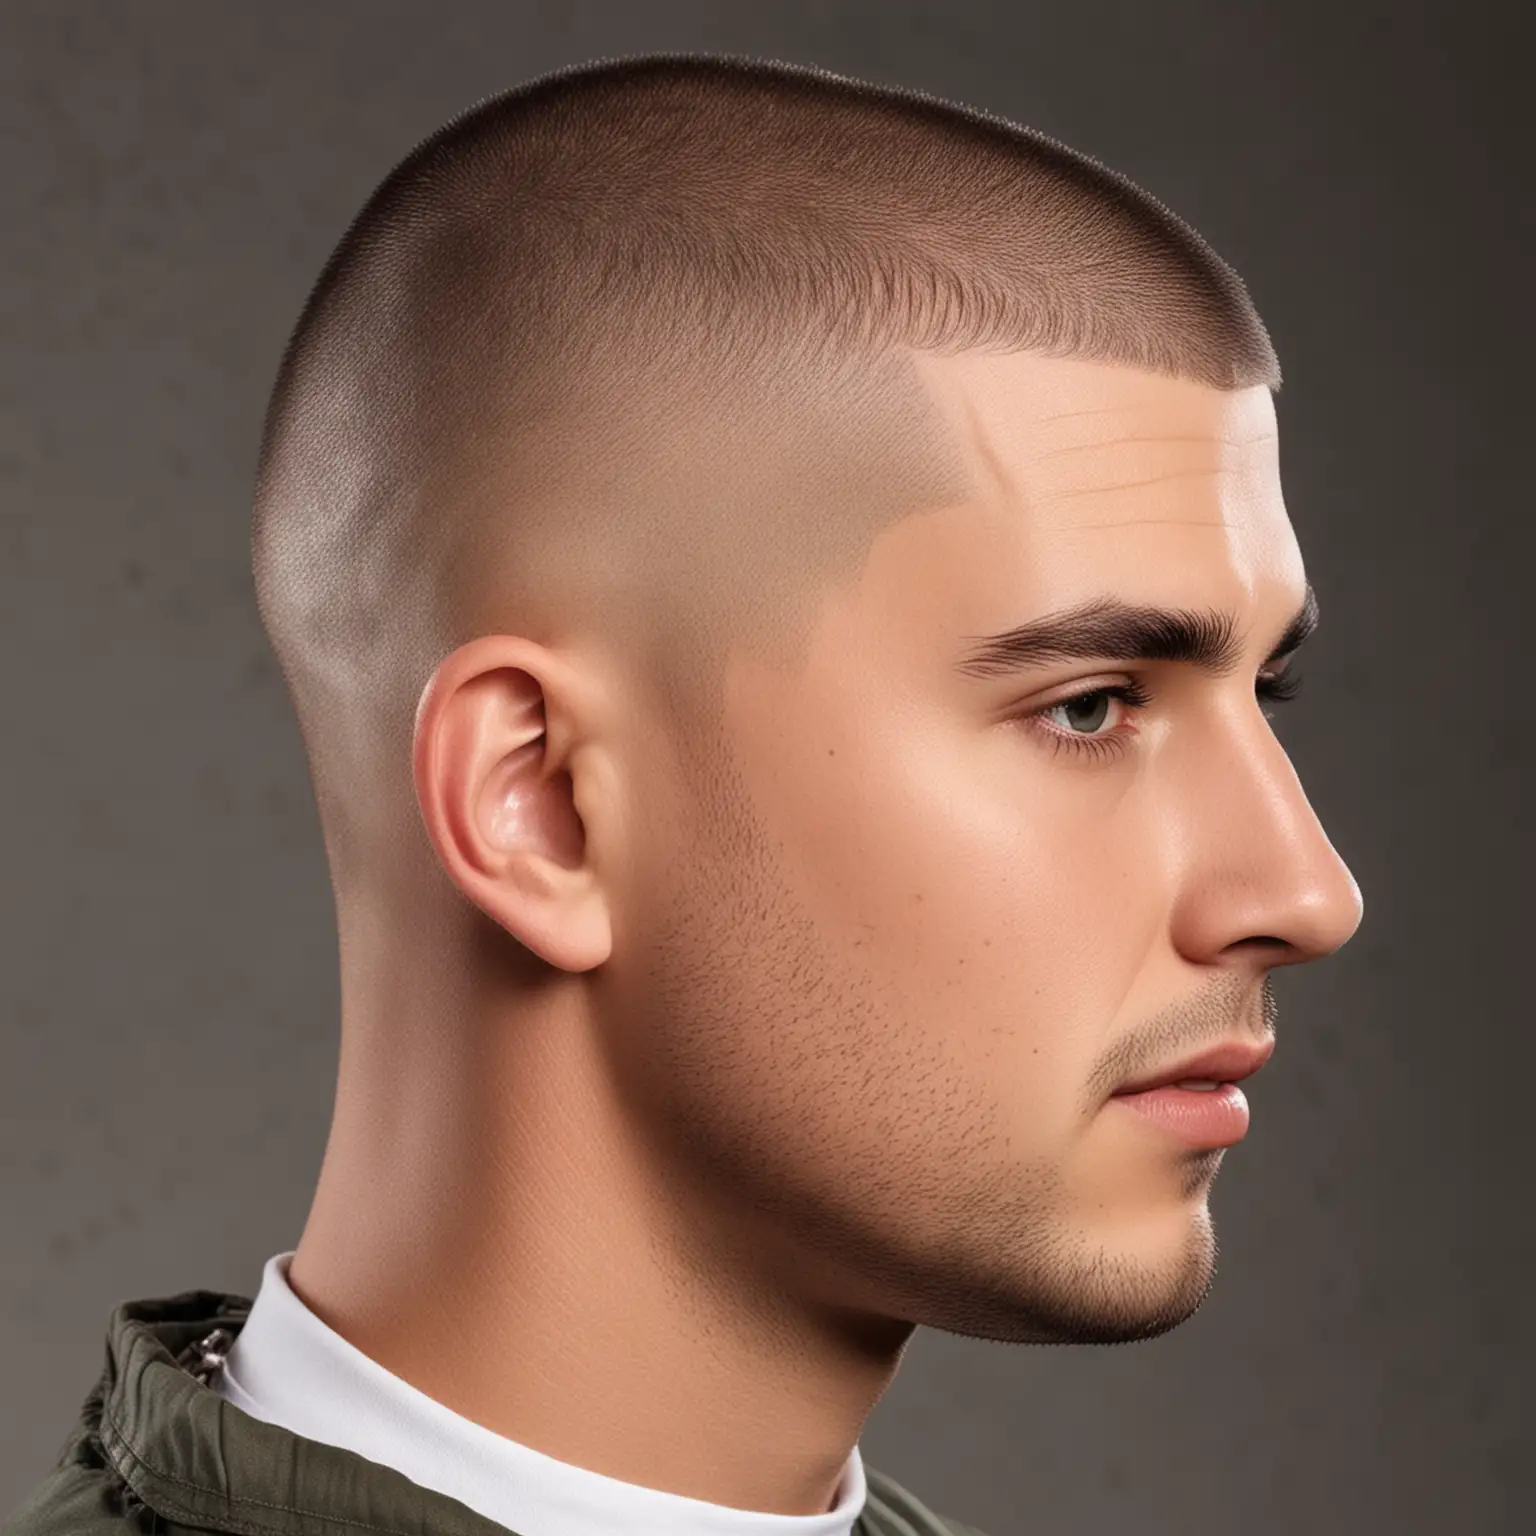 Confident Man with Buzz Cut Hairstyle